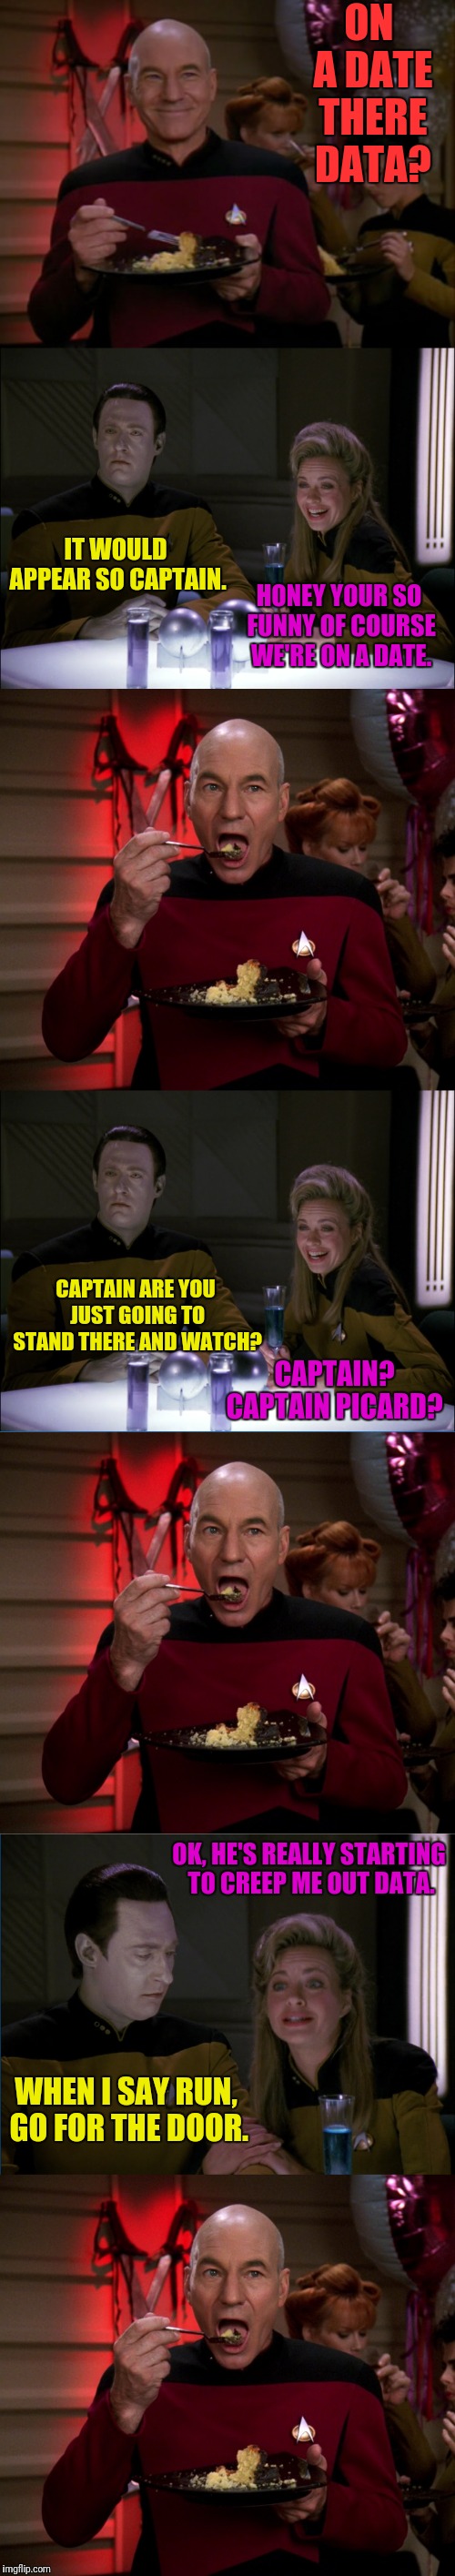 Data On A Date | ON A DATE THERE DATA? IT WOULD APPEAR SO CAPTAIN. HONEY YOUR SO FUNNY OF COURSE WE'RE ON A DATE. CAPTAIN ARE YOU JUST GOING TO STAND THERE AND WATCH? CAPTAIN? CAPTAIN PICARD? OK, HE'S REALLY STARTING TO CREEP ME OUT DATA. WHEN I SAY RUN, GO FOR THE DOOR. | image tagged in star trek the next generation,data,captain picard,creepy guy,eating | made w/ Imgflip meme maker